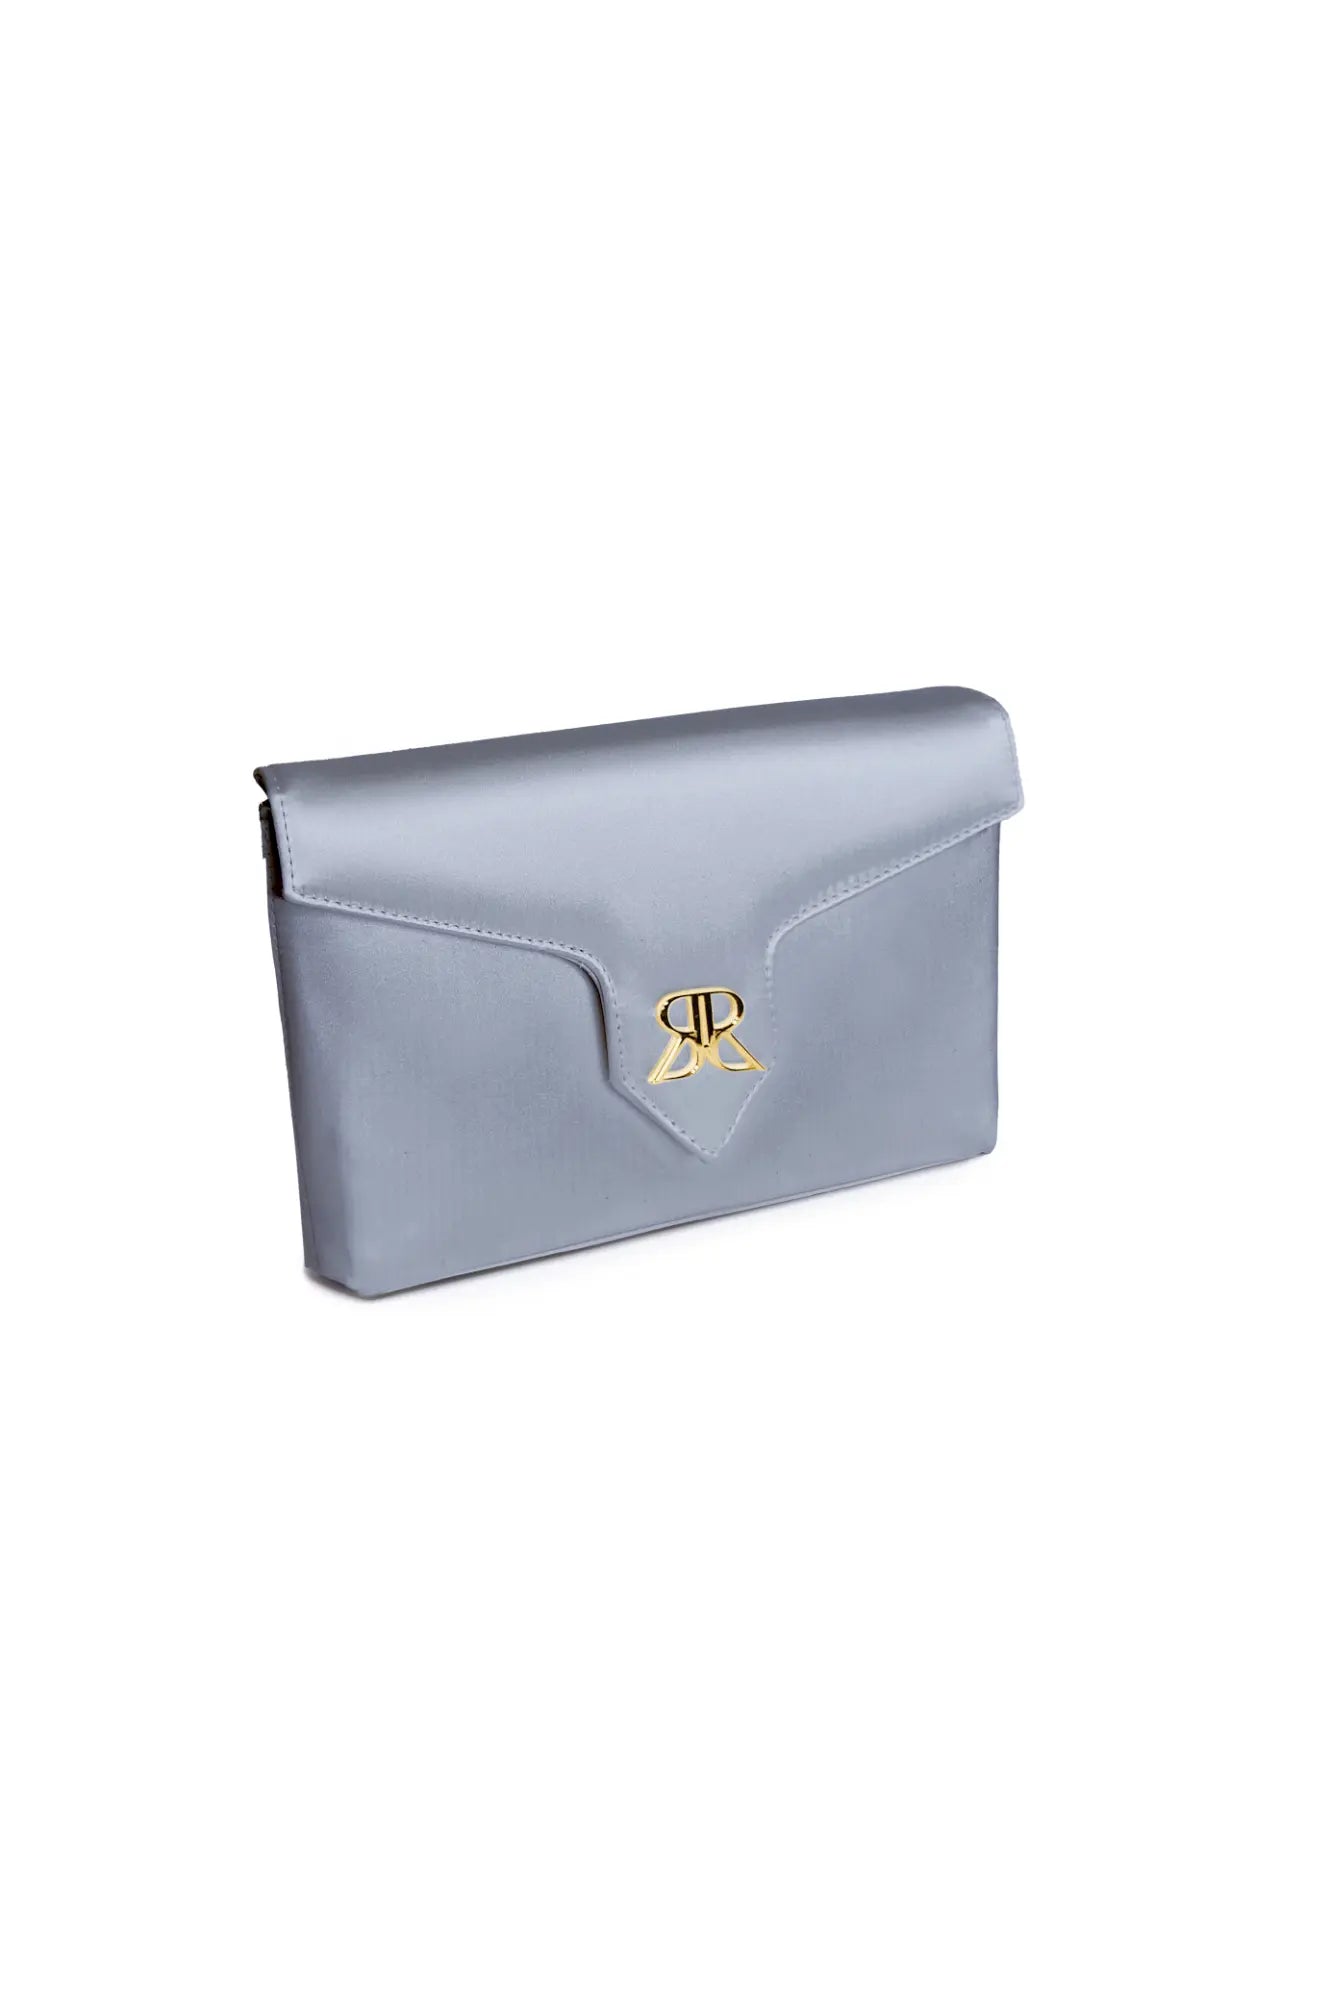 An Italian luxury accessory, a Love Note Envelope Clutch Steel Blue from The Bella Rosa Collection with a gold clasp on a white background.